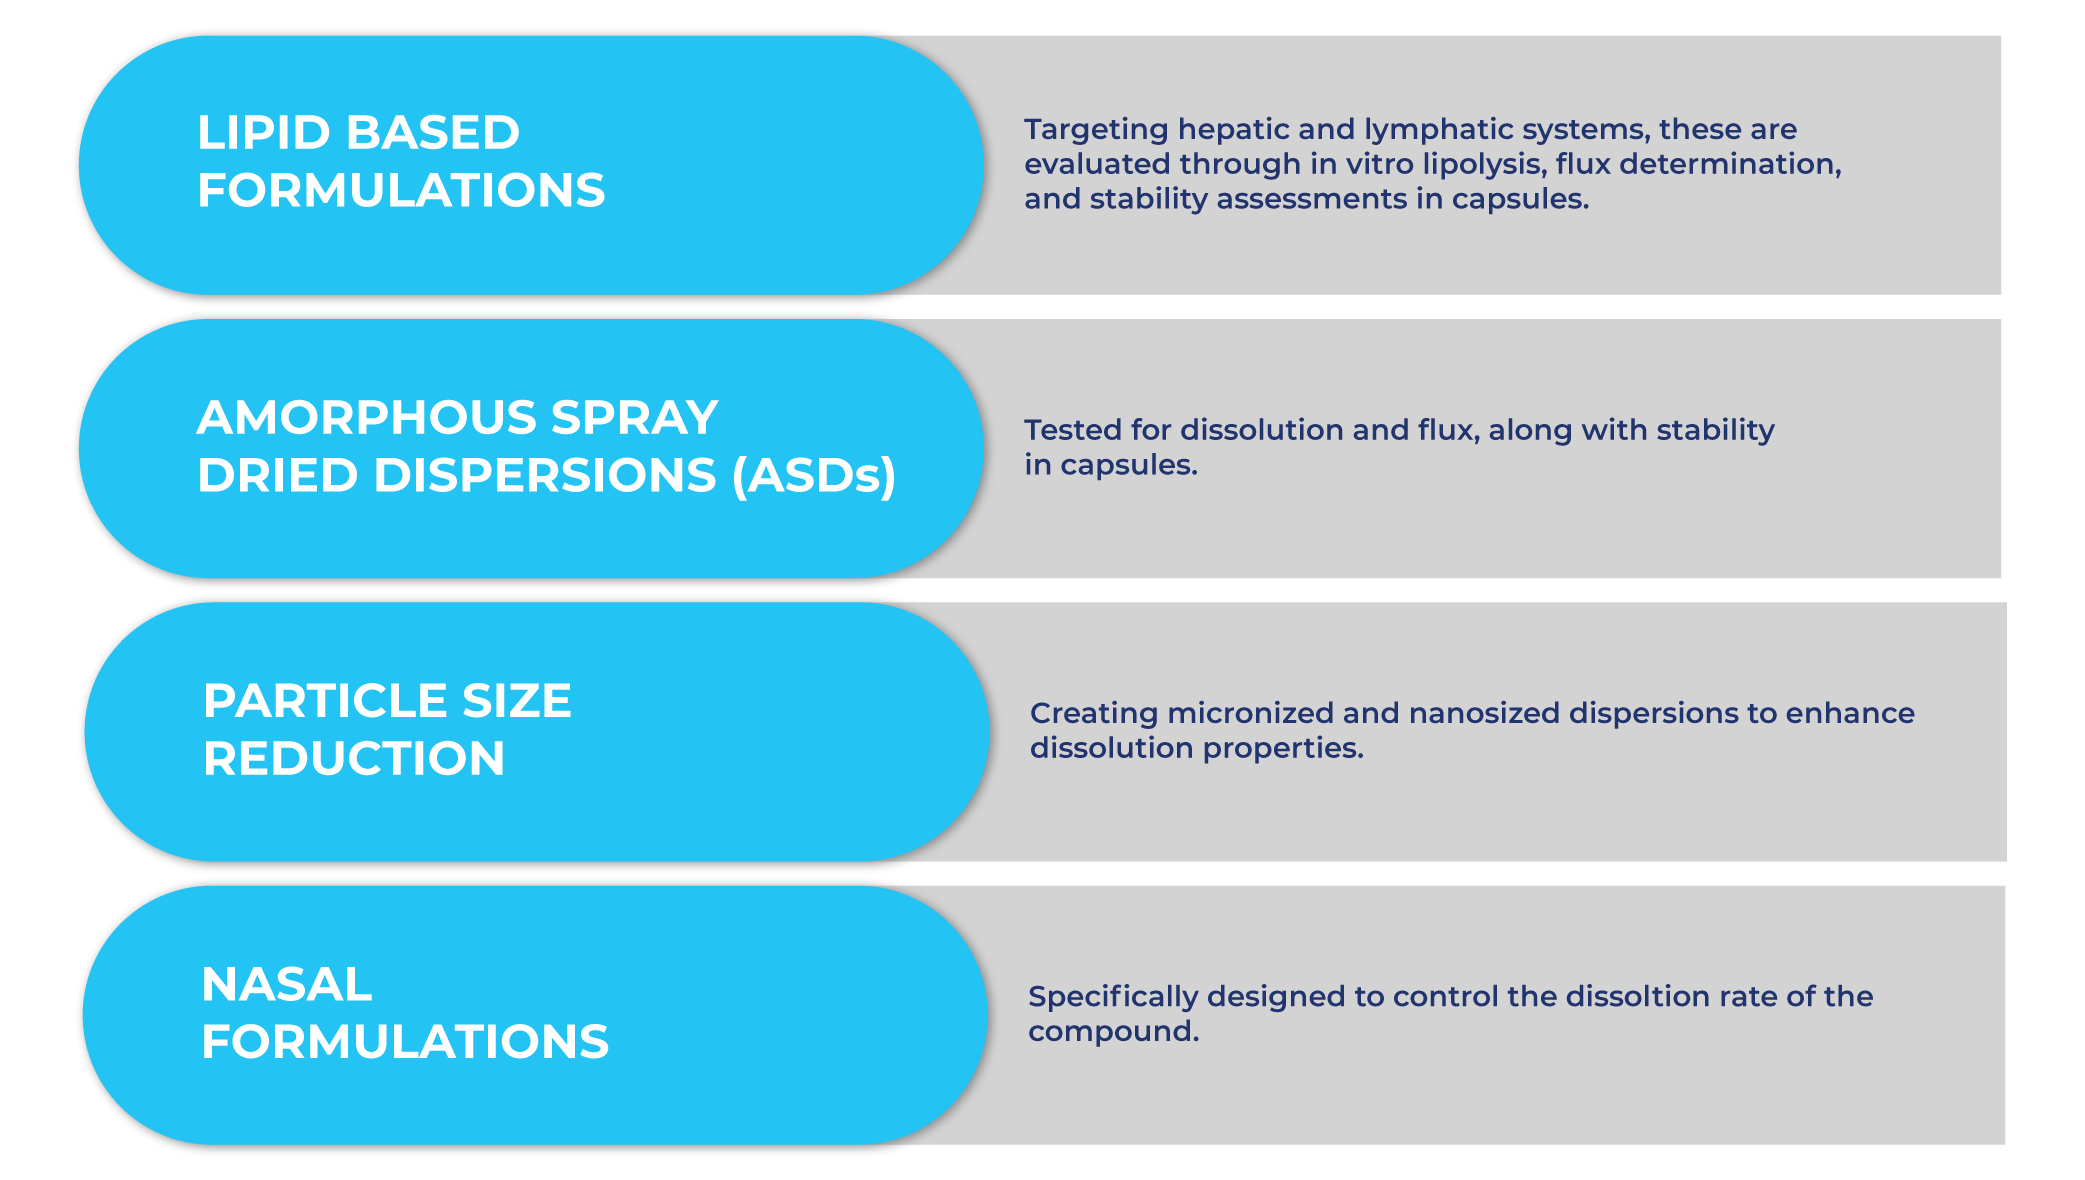 Lipid Based Formulations, Amorphous Spray Dried Dispersions (ASDs), Particle Size Reduction, Nasal Formulations